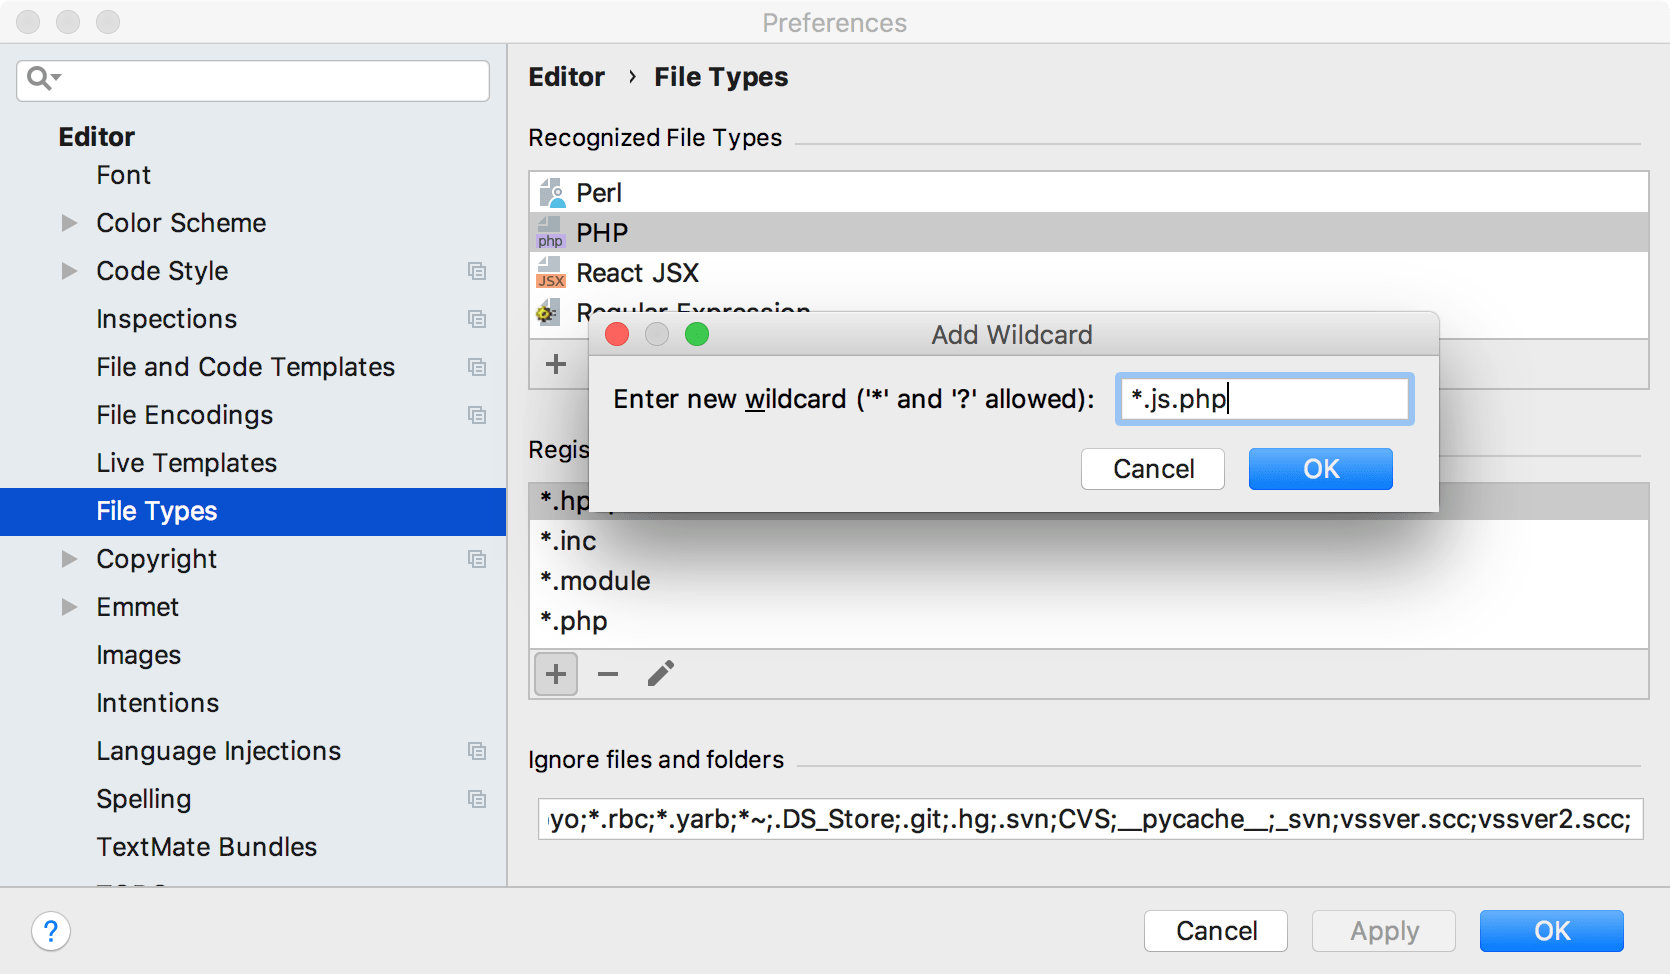 File types settings page